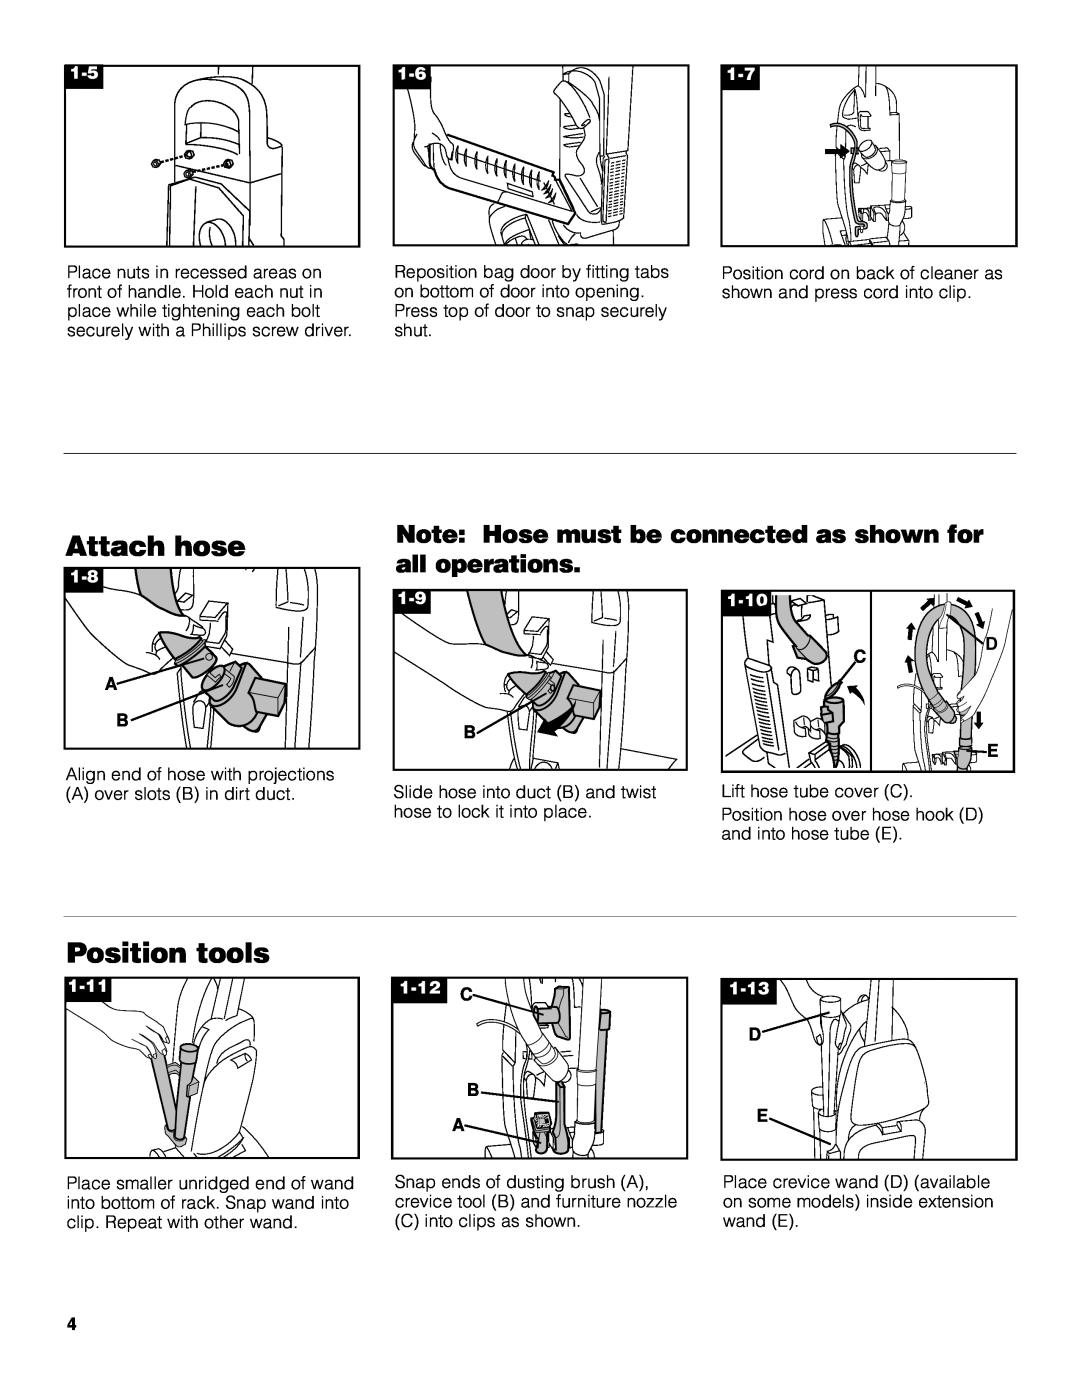 Hoover Bagged Tempo Upright Vacuum Cleaner owner manual Attach hose, Position tools, 1-10, D C E, 1-11, 1-12 C, 1-13 